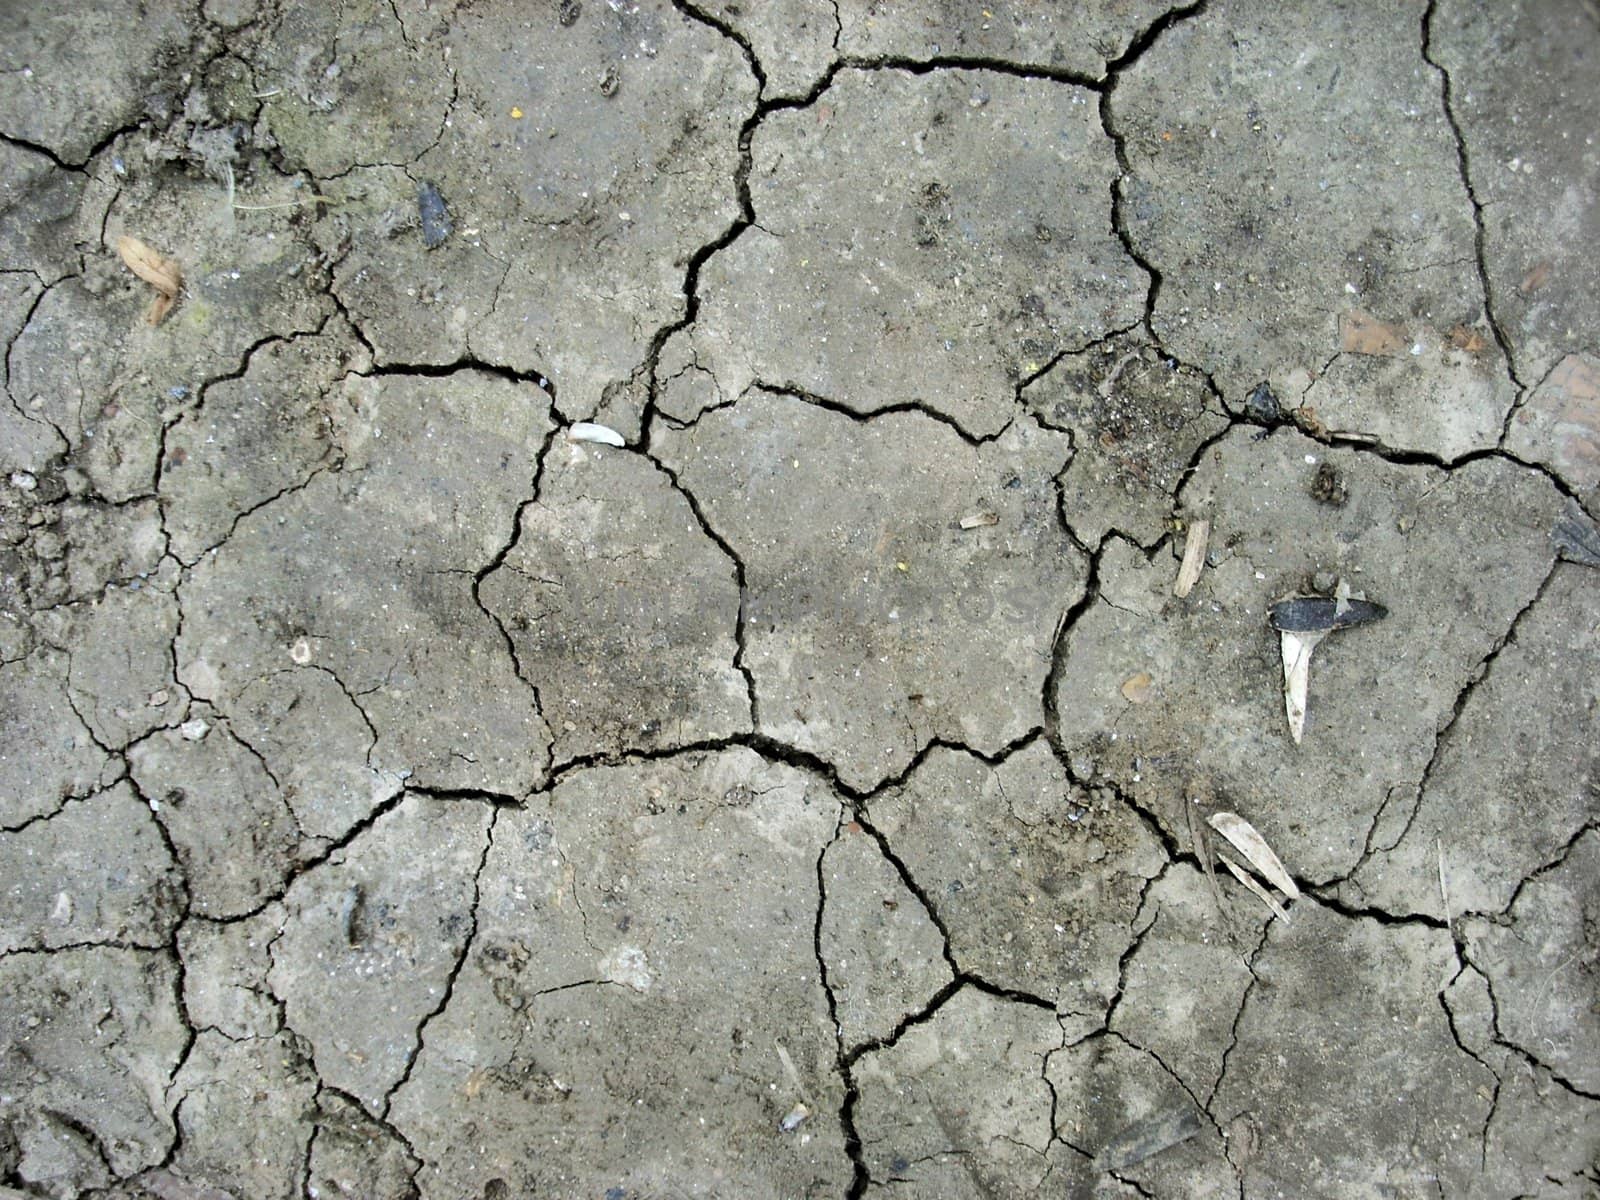 Dry soil by DOODNICK